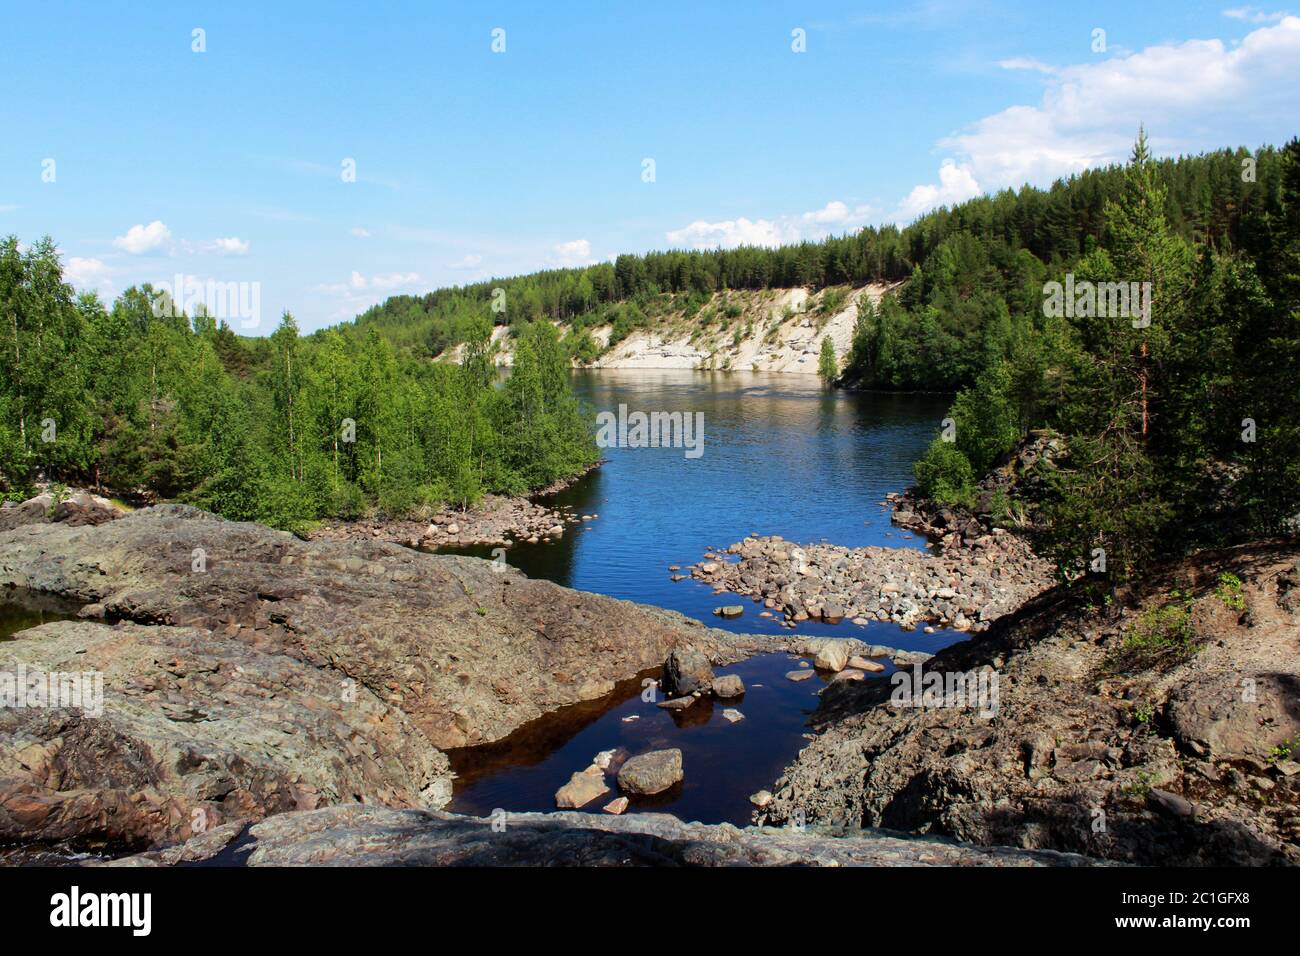 A wide river flows between sandy beaches surrounded by a mixed coniferous forest. Karelia, Russia. In the foreground is an extin Stock Photo